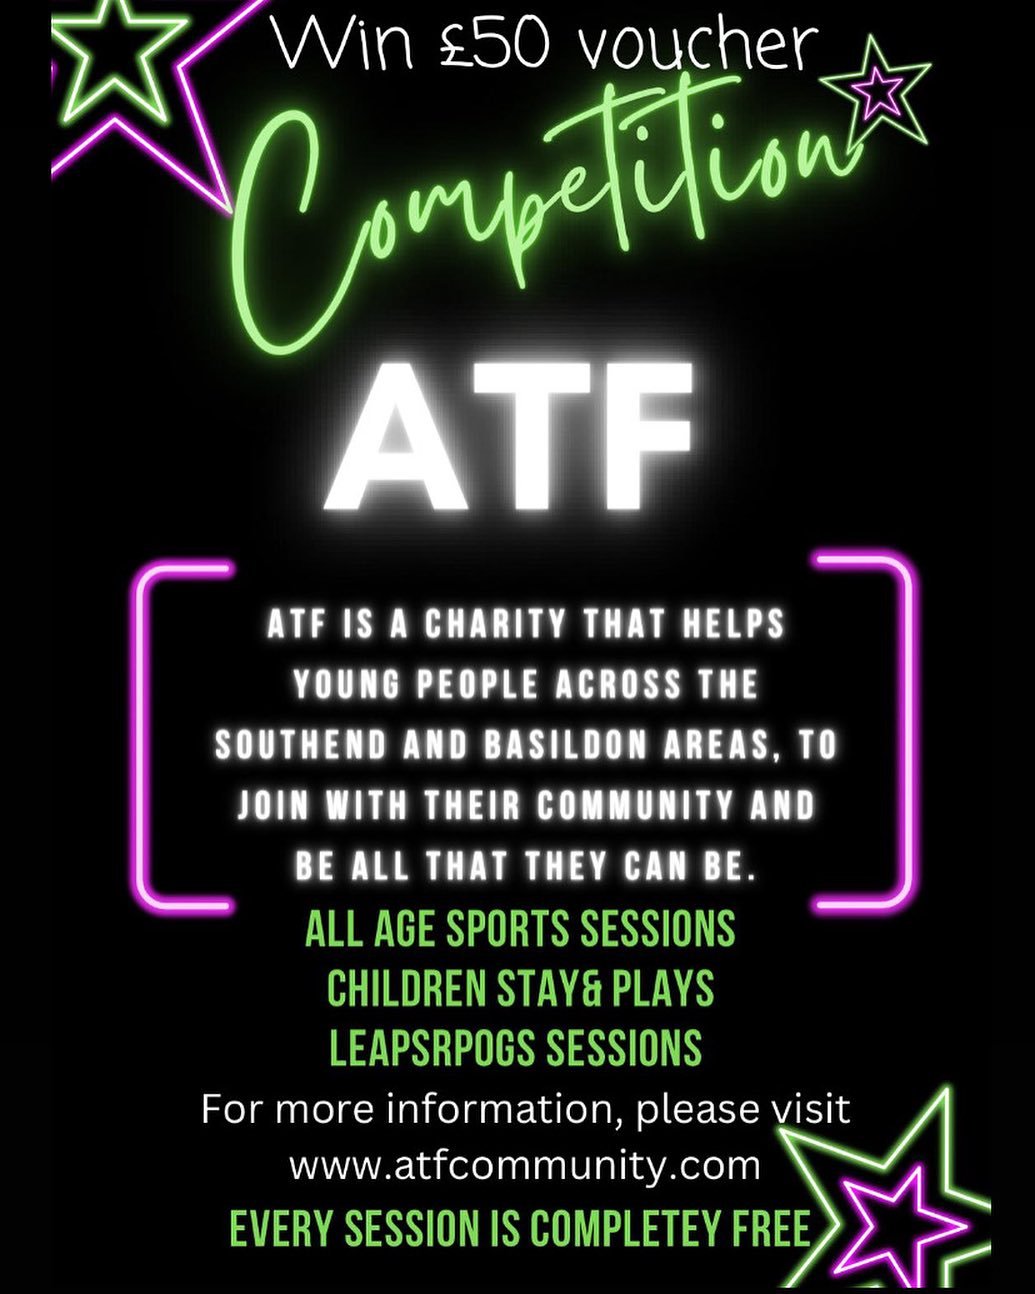 🌟🎉✨ ATF COMPETITION TIME ✨️🎉🌟
 - 𝐋𝐈𝐊𝐄 &amp; 𝐂𝐎𝐌𝐌𝐄𝐍𝐓! ✨🎉🌟

Win a &pound;50 Gift Card for AMAZON!

For your chance to win, all you need to do is simply:

👍 LIKE this Post.
👍 LIKE our Page.
👍TAG 3 Friends in the comments.
👍SHARE thi